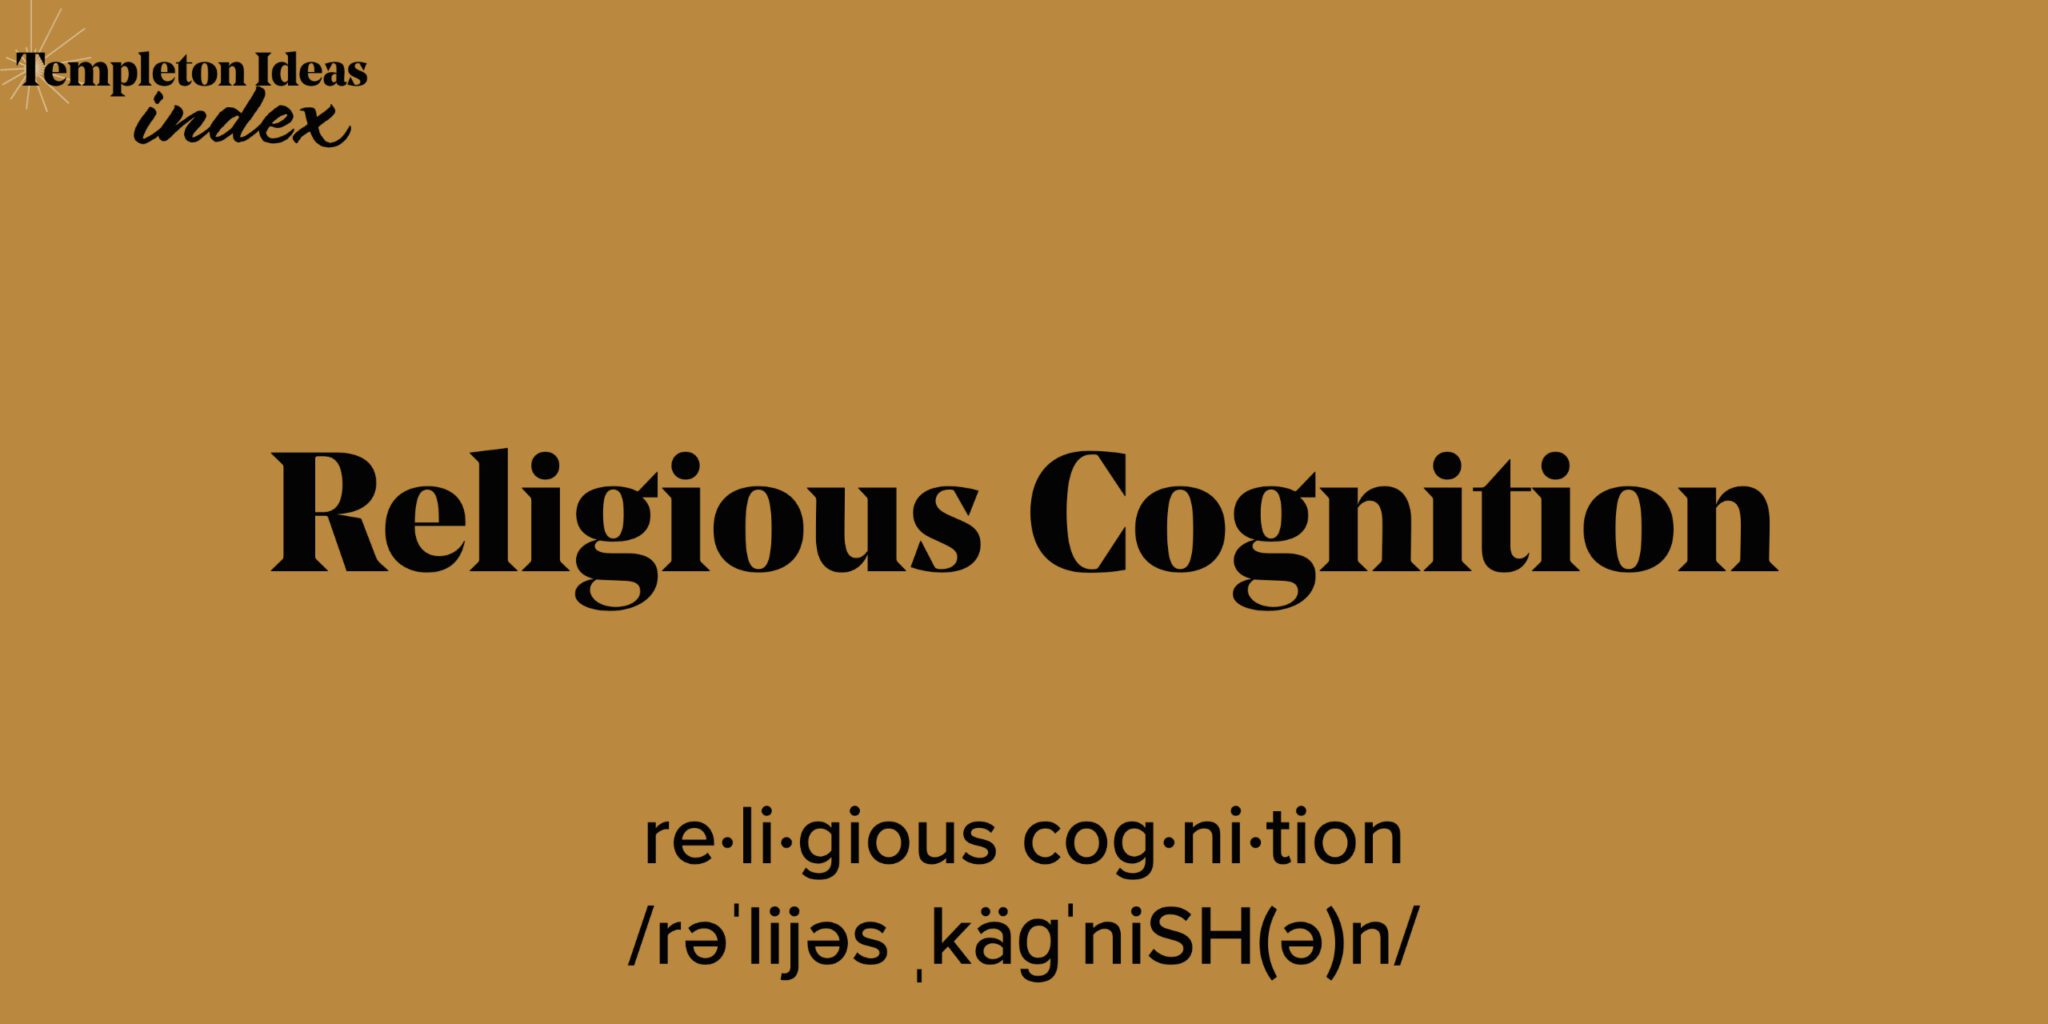 What Is Religious Cognition?